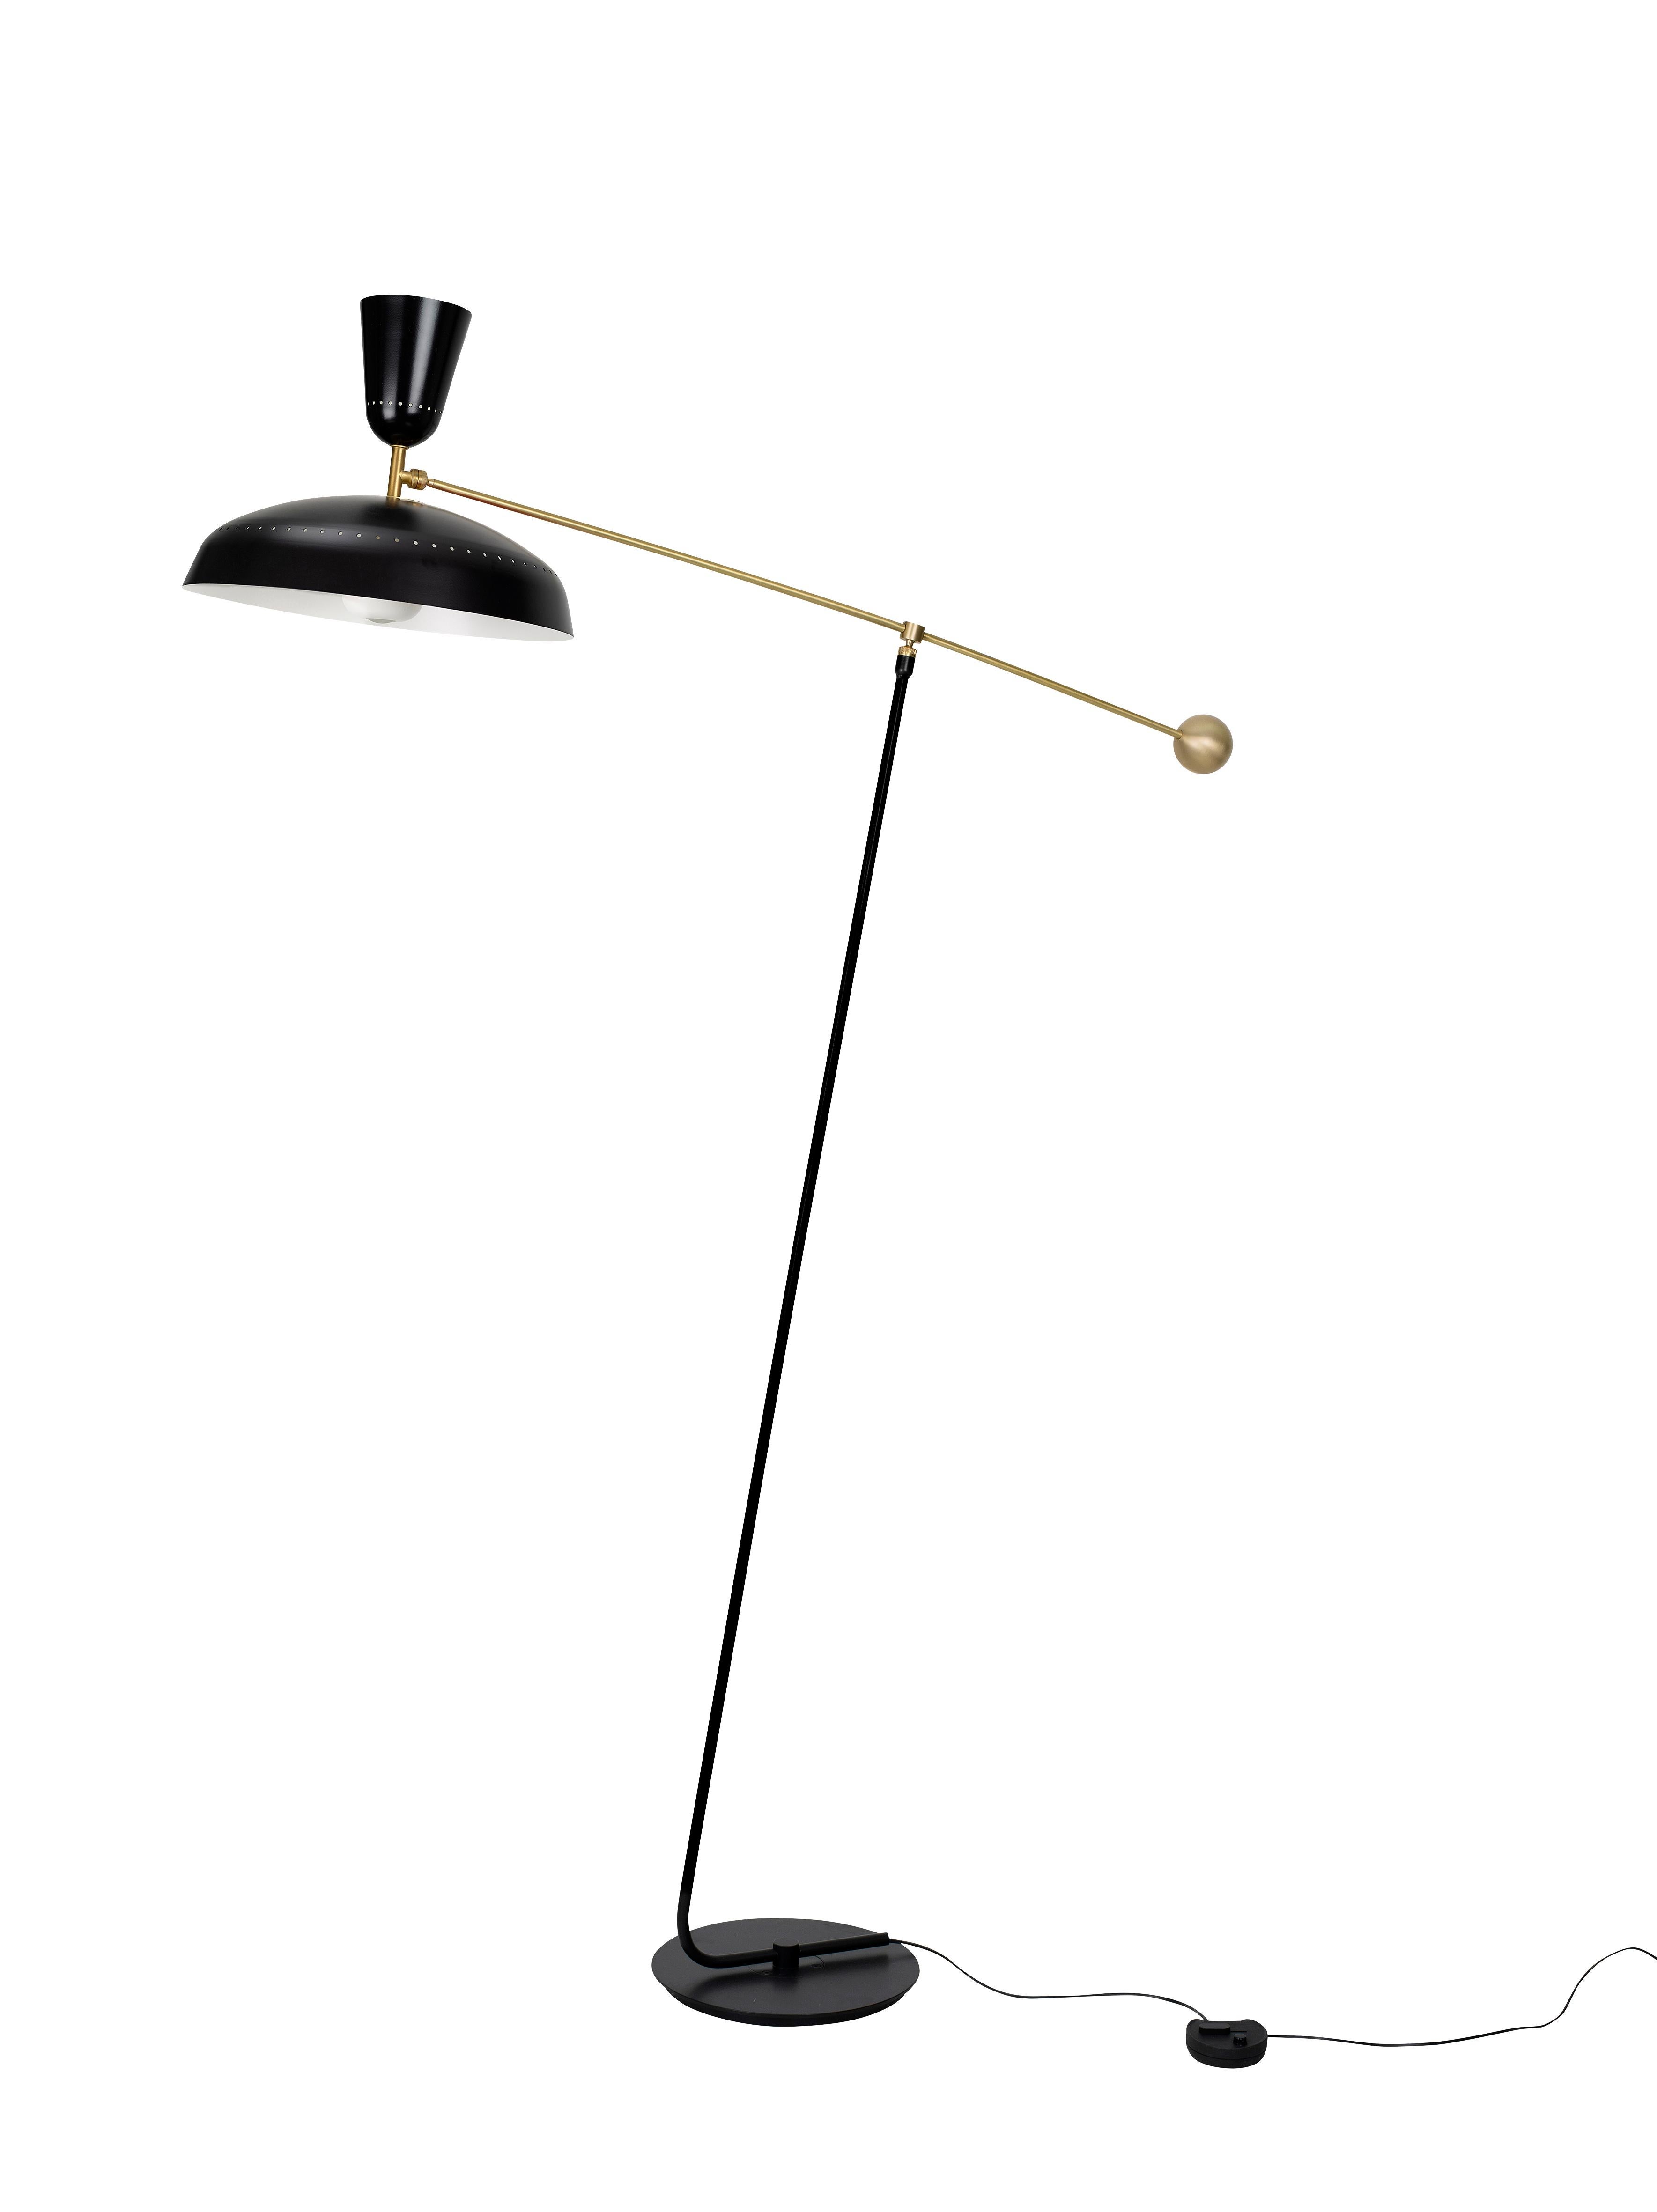 Large Pierre Guariche 'G1' Floor Lamp for Sammode Studio in Black For Sale 3